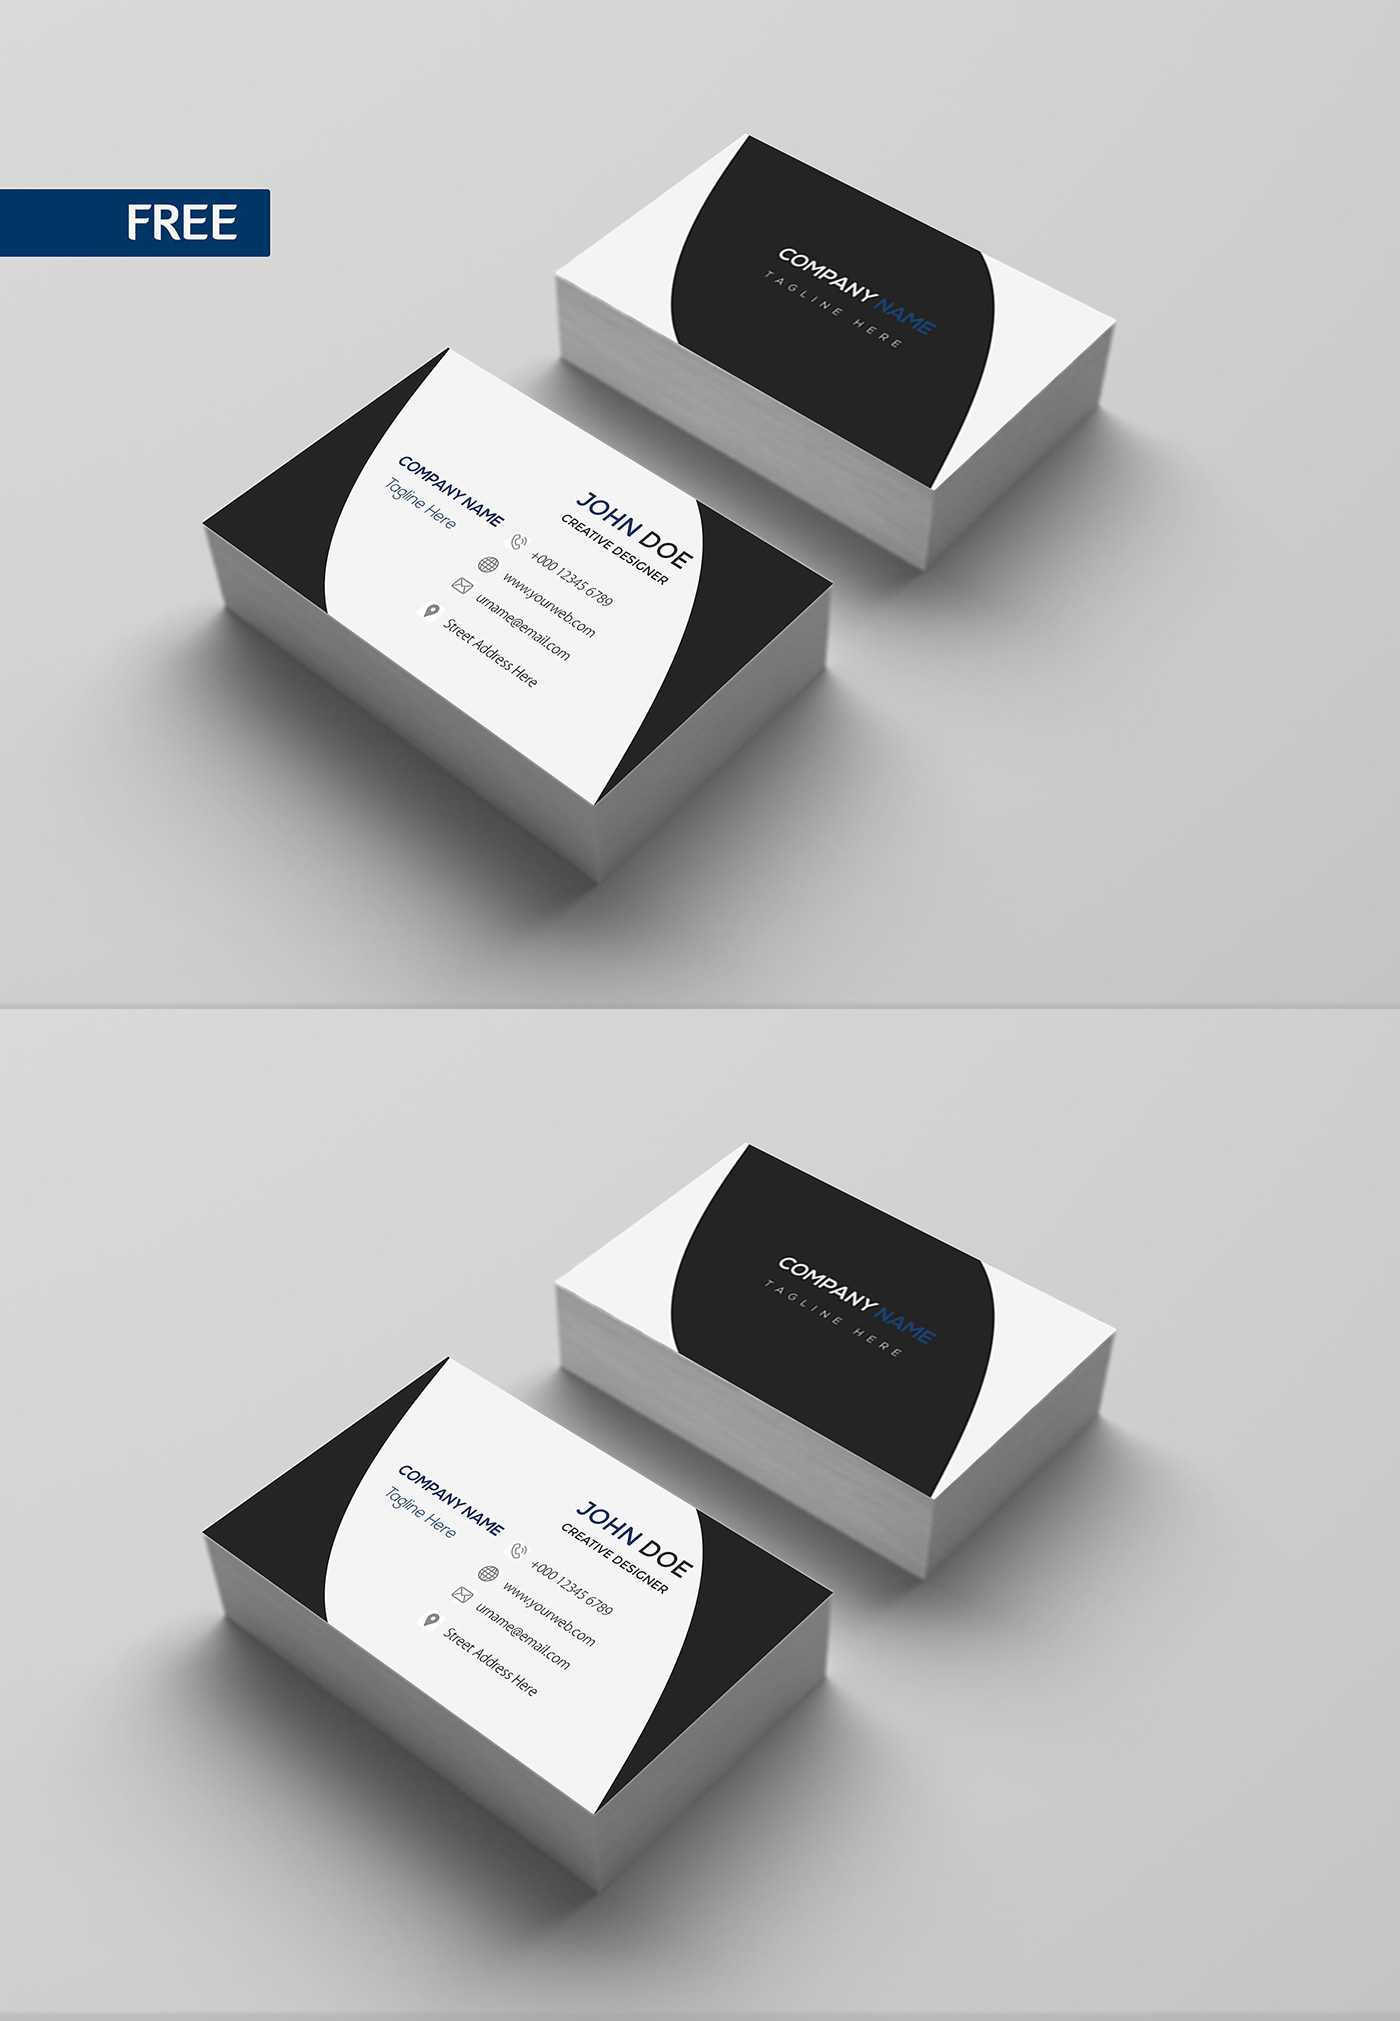 Free Print Design Business Card Template On Behance Throughout Free Template Business Cards To Print